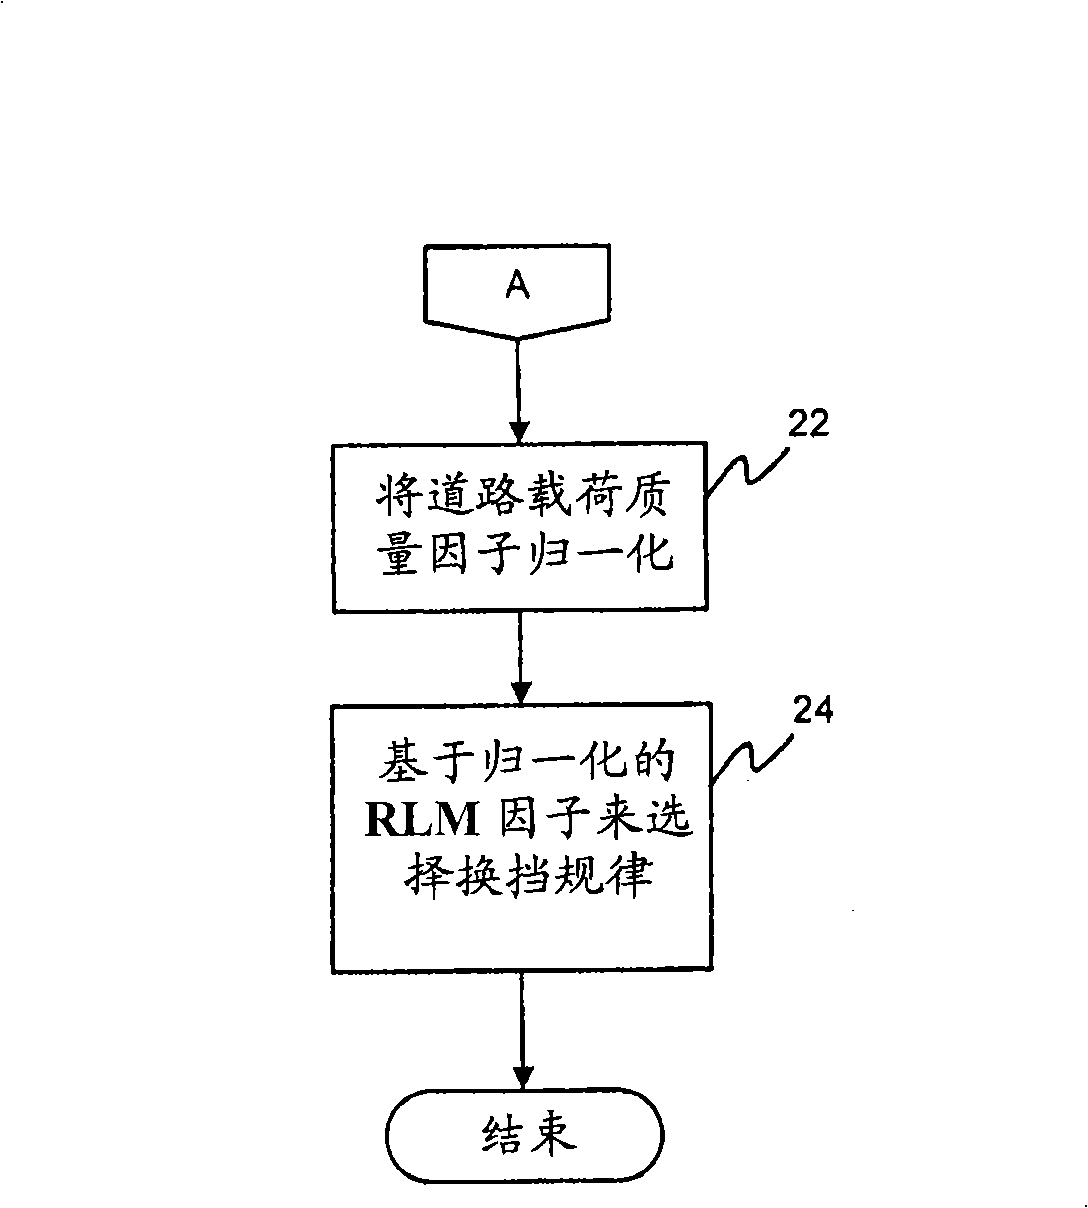 Method of selecting a transmission shift schedule